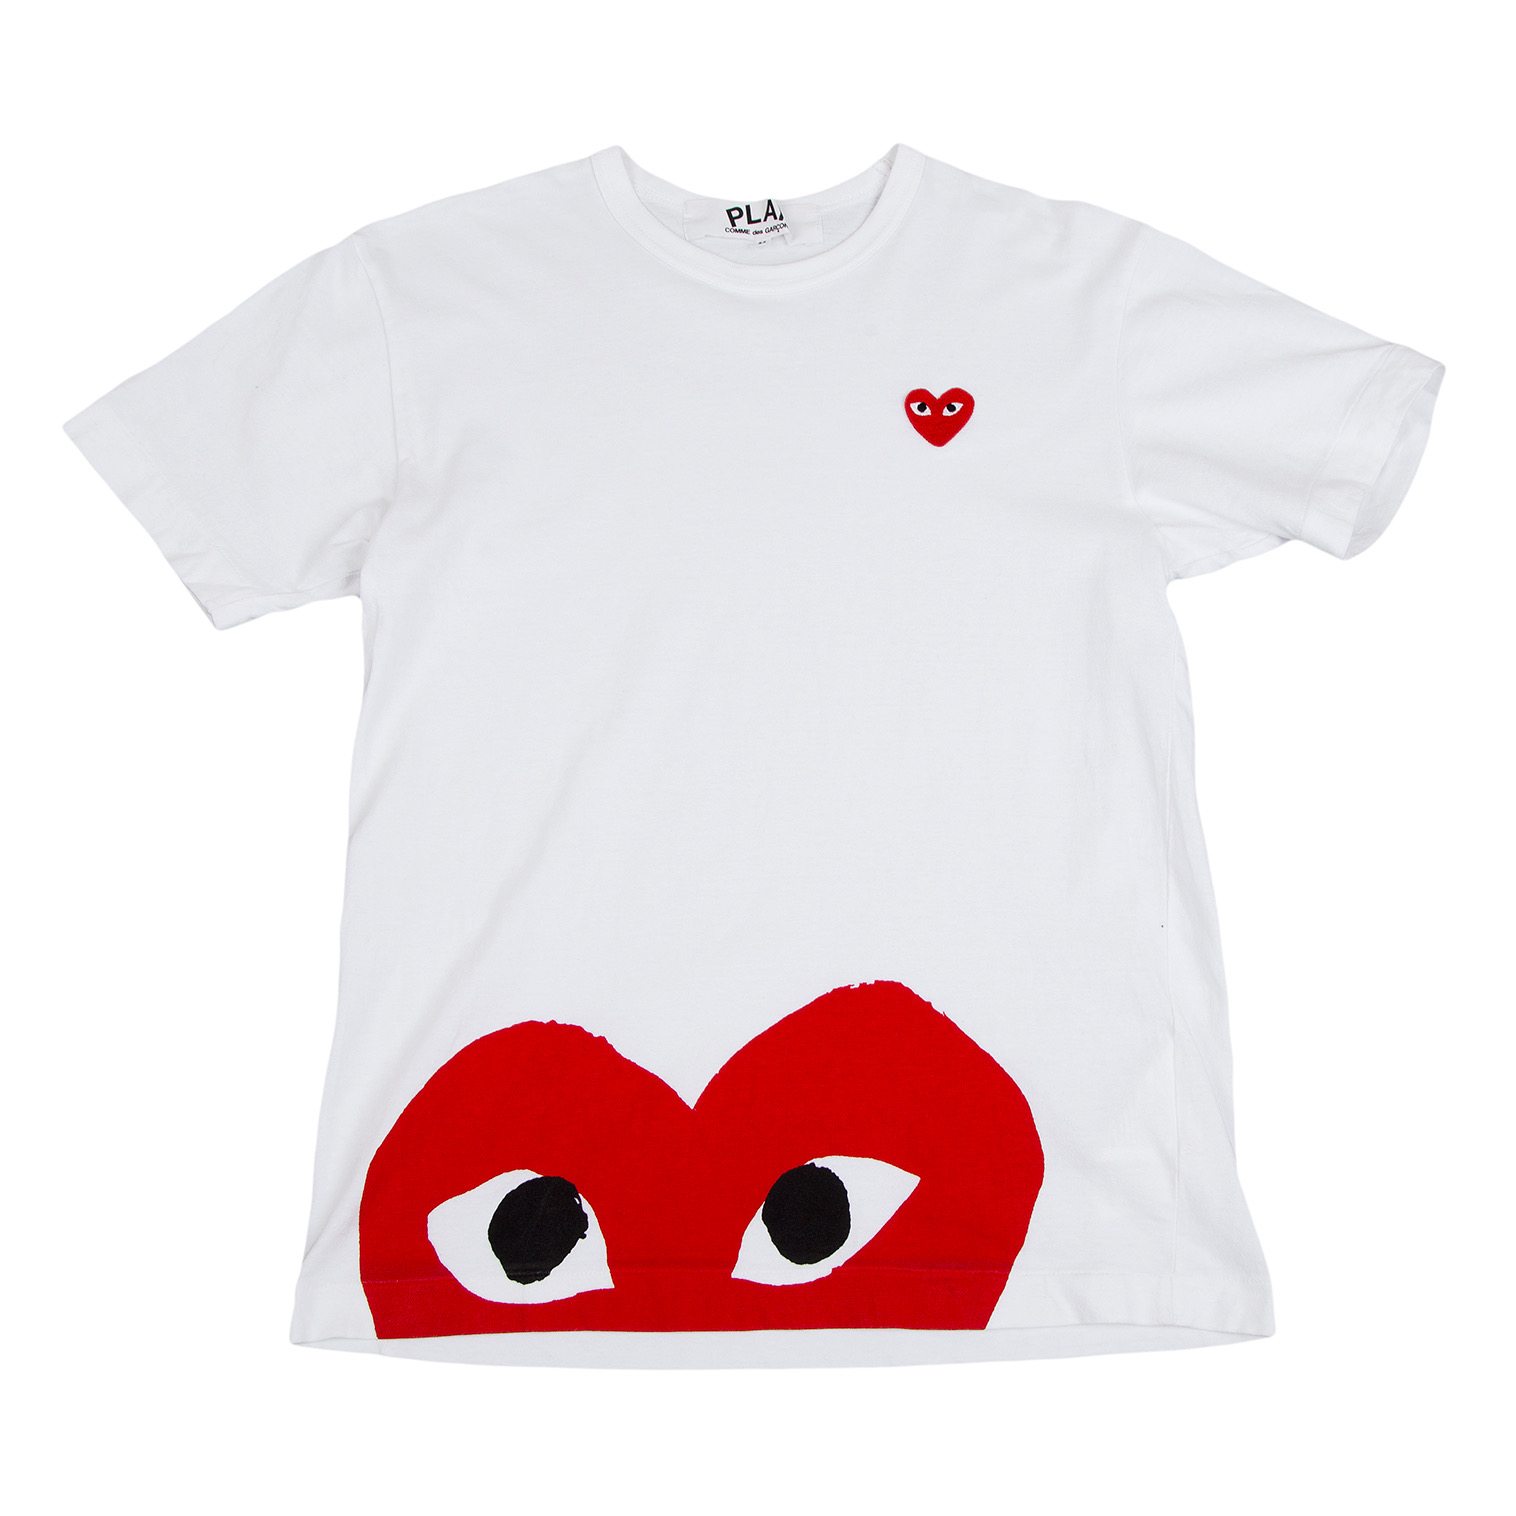 PLAY COMME des GARÇONS フロント ハートプリント Tシャツ